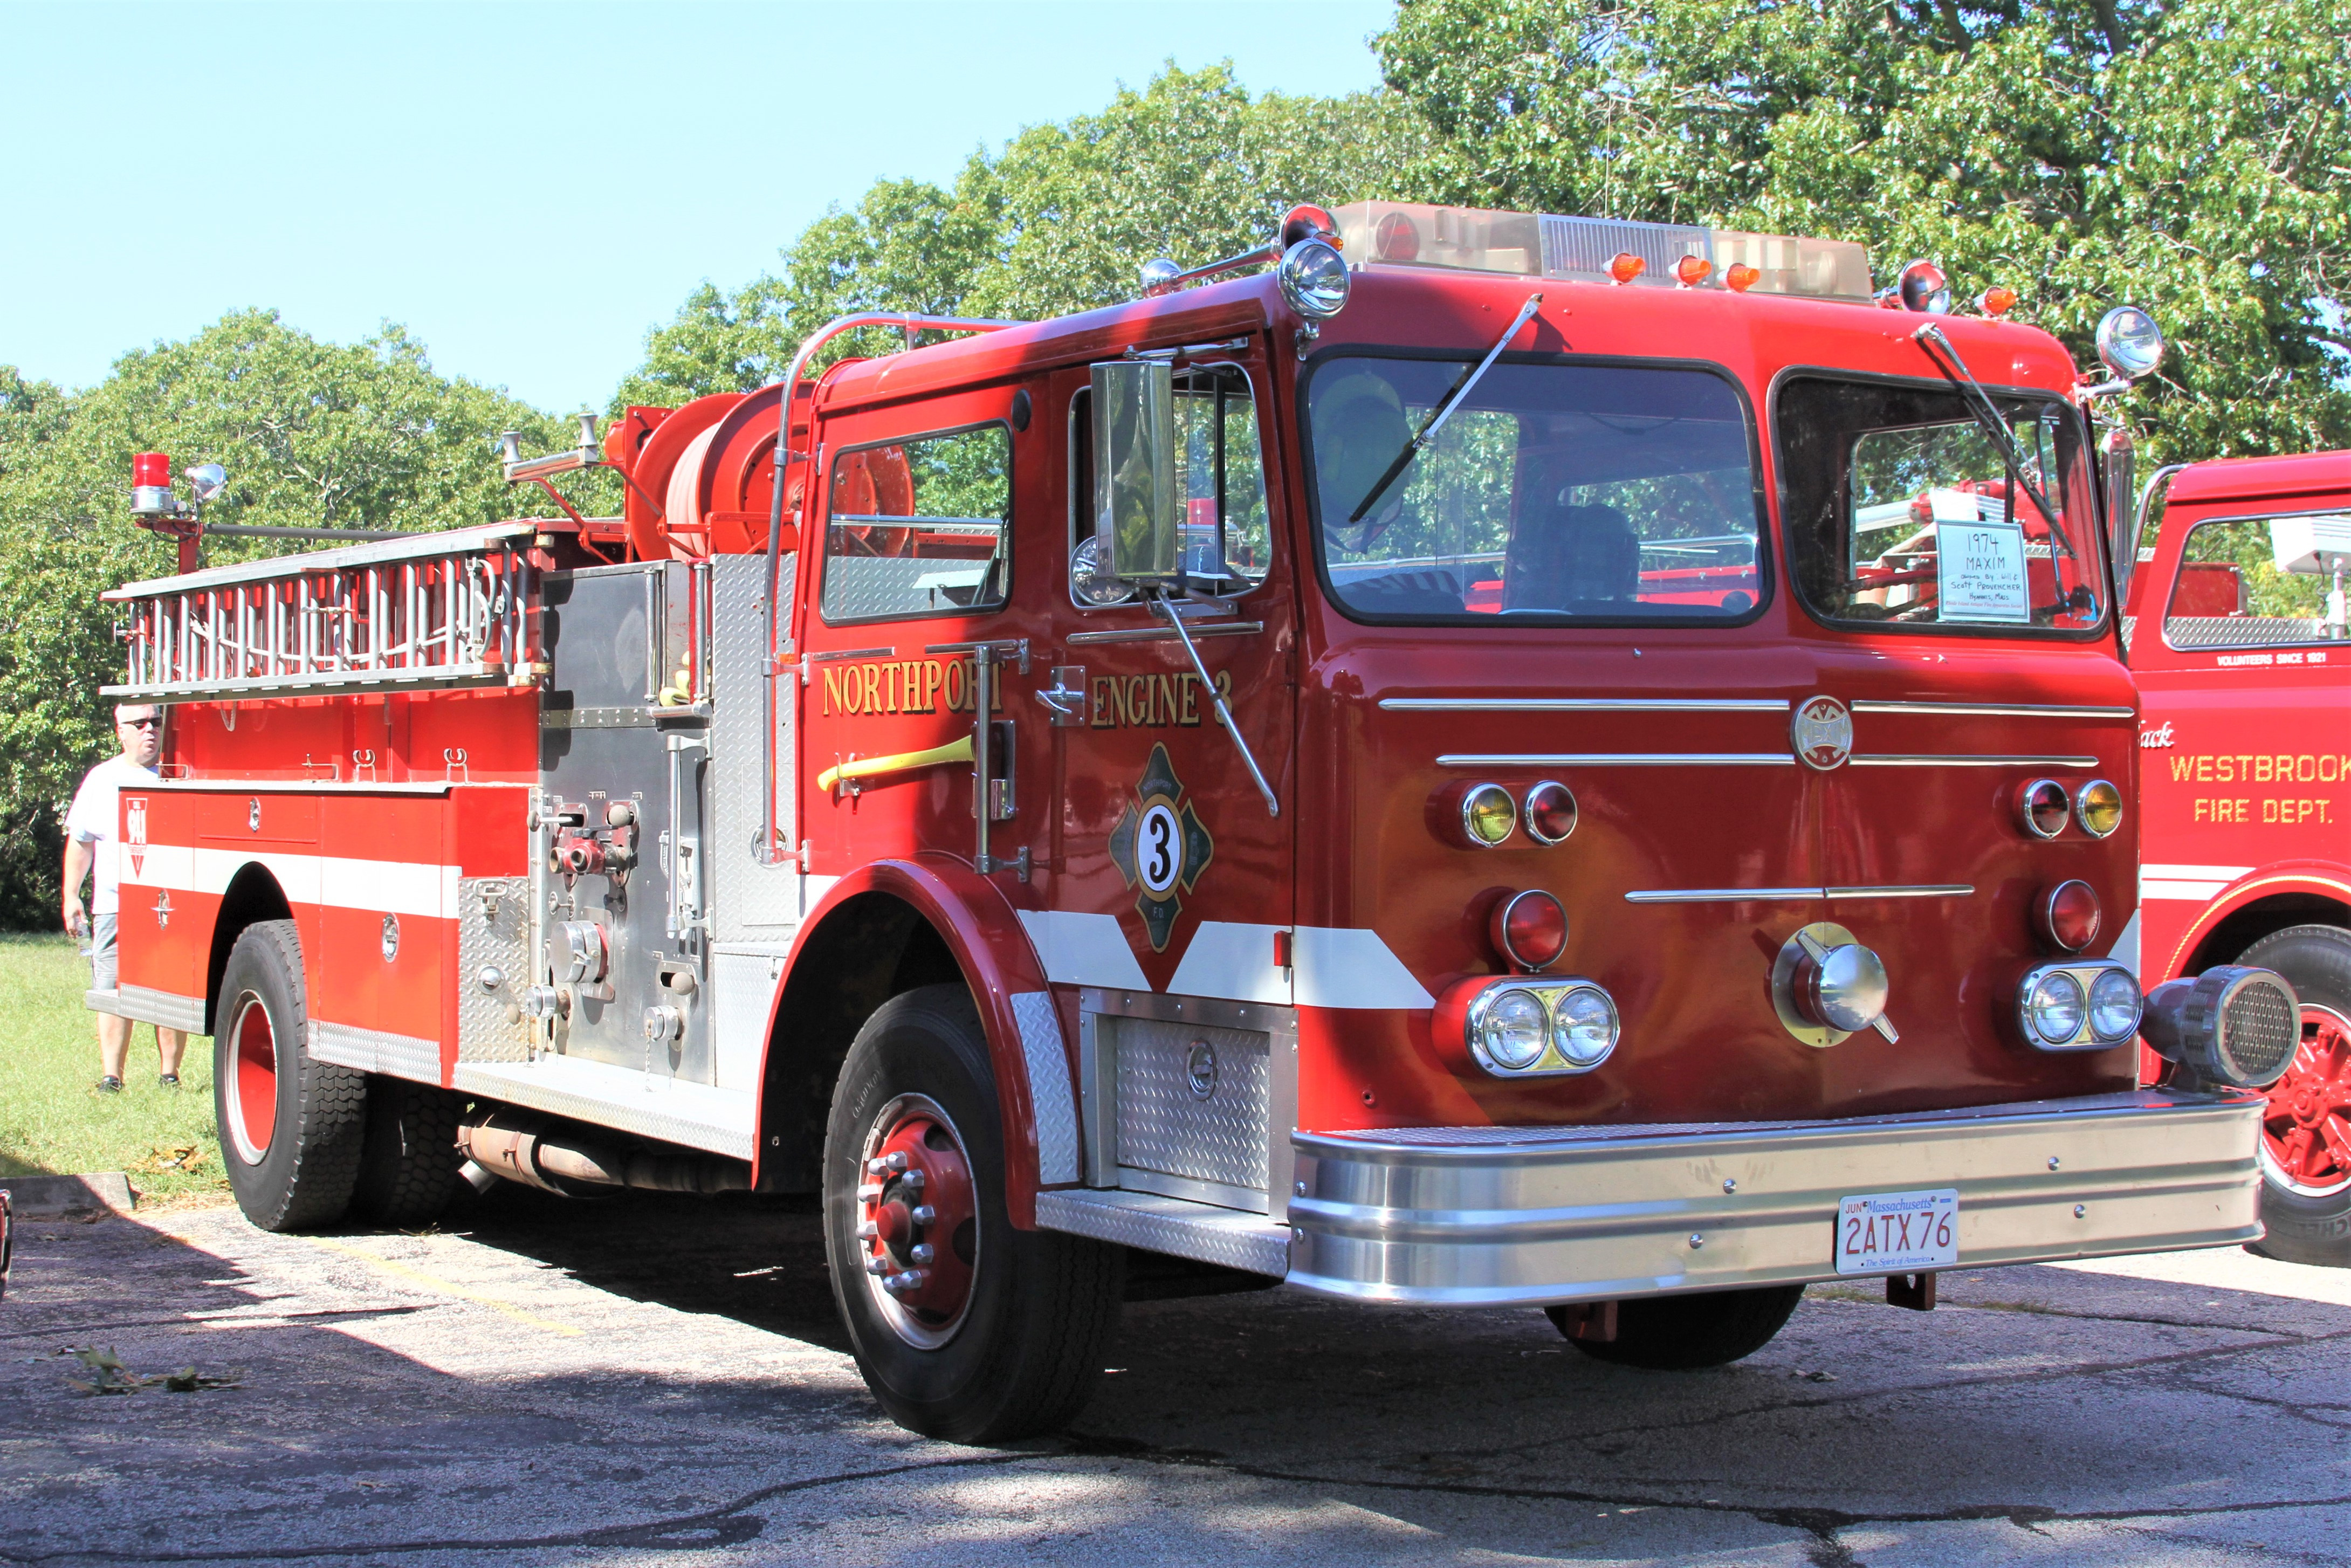 A photo  of Antique Fire Apparatus in Massachusetts
            Northport, ME Fire Engine 3, a 1975 Maxim             taken by Richard Schmitter